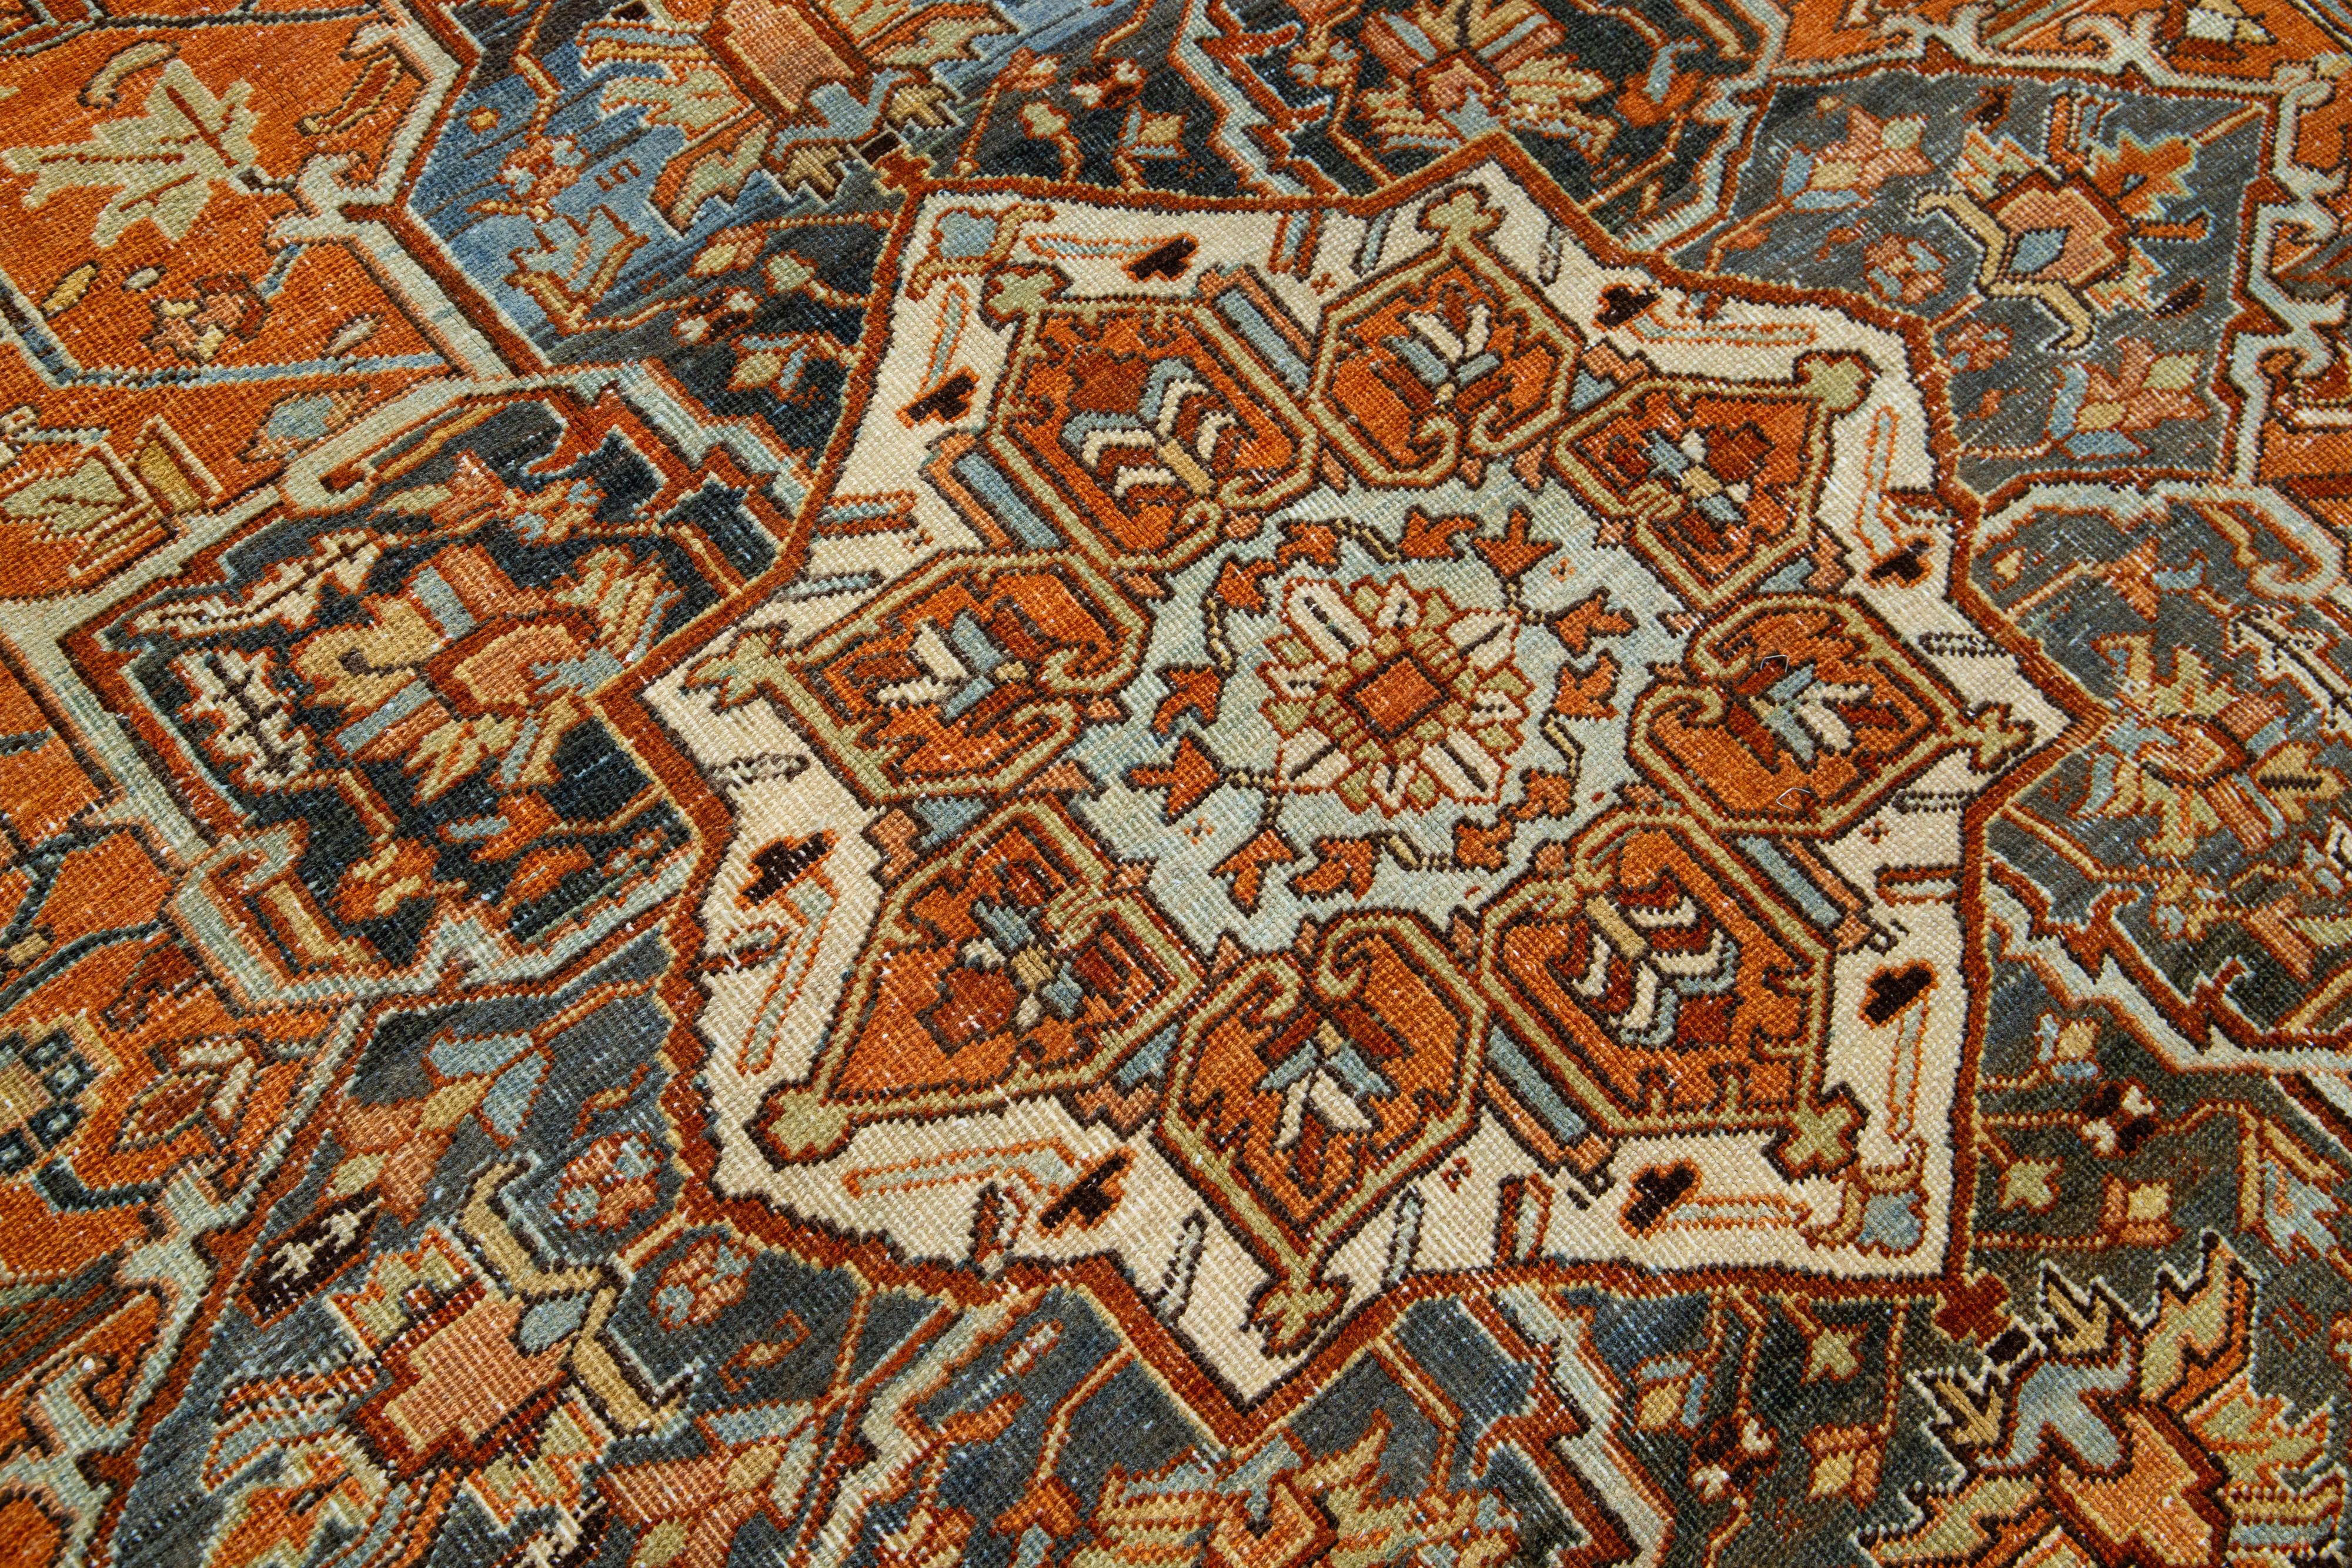 Early 20th Century Persian 1910s Antique Heriz Medallion Wool Rug With Orange-Rust Color Design For Sale